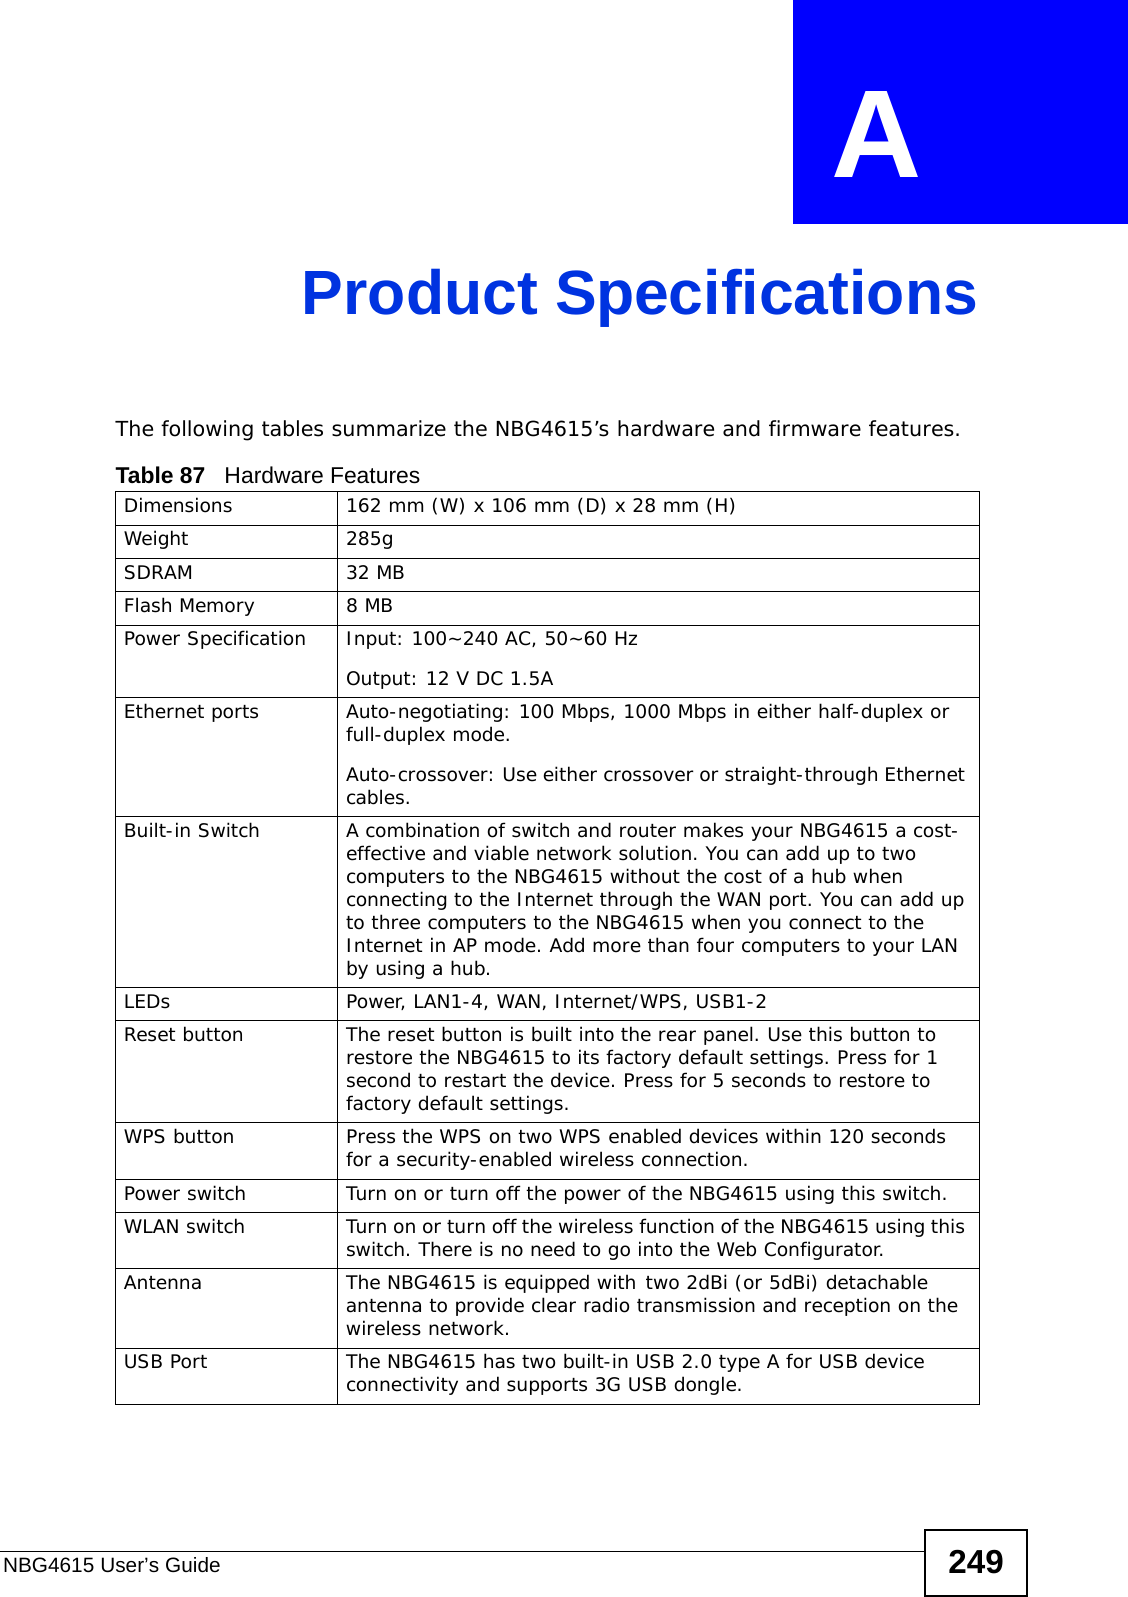 NBG4615 User’s Guide 249APPENDIX  A Product SpecificationsThe following tables summarize the NBG4615’s hardware and firmware features.Table 87   Hardware FeaturesDimensions 162 mm (W) x 106 mm (D) x 28 mm (H)Weight 285gSDRAM 32 MBFlash Memory 8 MBPower Specification Input: 100~240 AC, 50~60 HzOutput: 12 V DC 1.5AEthernet ports Auto-negotiating: 100 Mbps, 1000 Mbps in either half-duplex or full-duplex mode.Auto-crossover: Use either crossover or straight-through Ethernet cables.Built-in Switch A combination of switch and router makes your NBG4615 a cost-effective and viable network solution. You can add up to two computers to the NBG4615 without the cost of a hub when connecting to the Internet through the WAN port. You can add up to three computers to the NBG4615 when you connect to the Internet in AP mode. Add more than four computers to your LAN by using a hub.LEDs Power, LAN1-4, WAN, Internet/WPS, USB1-2Reset button The reset button is built into the rear panel. Use this button to restore the NBG4615 to its factory default settings. Press for 1 second to restart the device. Press for 5 seconds to restore to factory default settings.WPS button Press the WPS on two WPS enabled devices within 120 seconds for a security-enabled wireless connection.Power switch Turn on or turn off the power of the NBG4615 using this switch.WLAN switch Turn on or turn off the wireless function of the NBG4615 using this switch. There is no need to go into the Web Configurator. Antenna The NBG4615 is equipped with two 2dBi (or 5dBi) detachable antenna to provide clear radio transmission and reception on the wireless network. USB Port The NBG4615 has two built-in USB 2.0 type A for USB device connectivity and supports 3G USB dongle. 